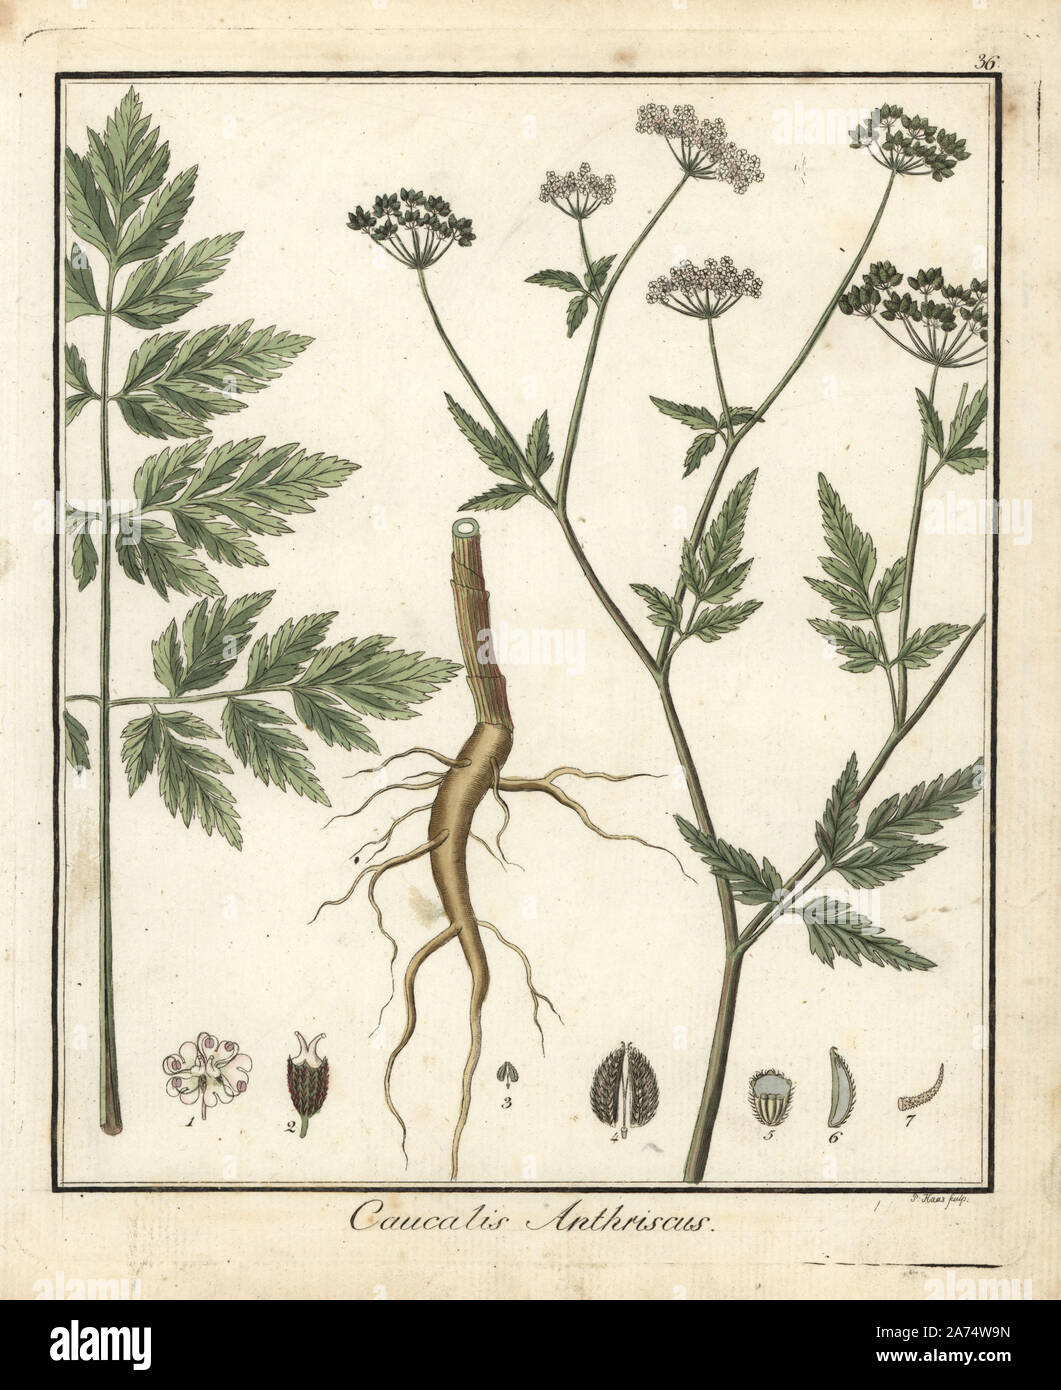 Burr chervil, Caucalis anthriscus. Handcoloured copperplate engraving by P. Haas from Dr. Friedrich Gottlob Hayne's Medical Botany, Berlin, 1822. Hayne (1763-1832) was a German botanist, apothecary and professor of pharmaceutical botany at Berlin University. Stock Photo